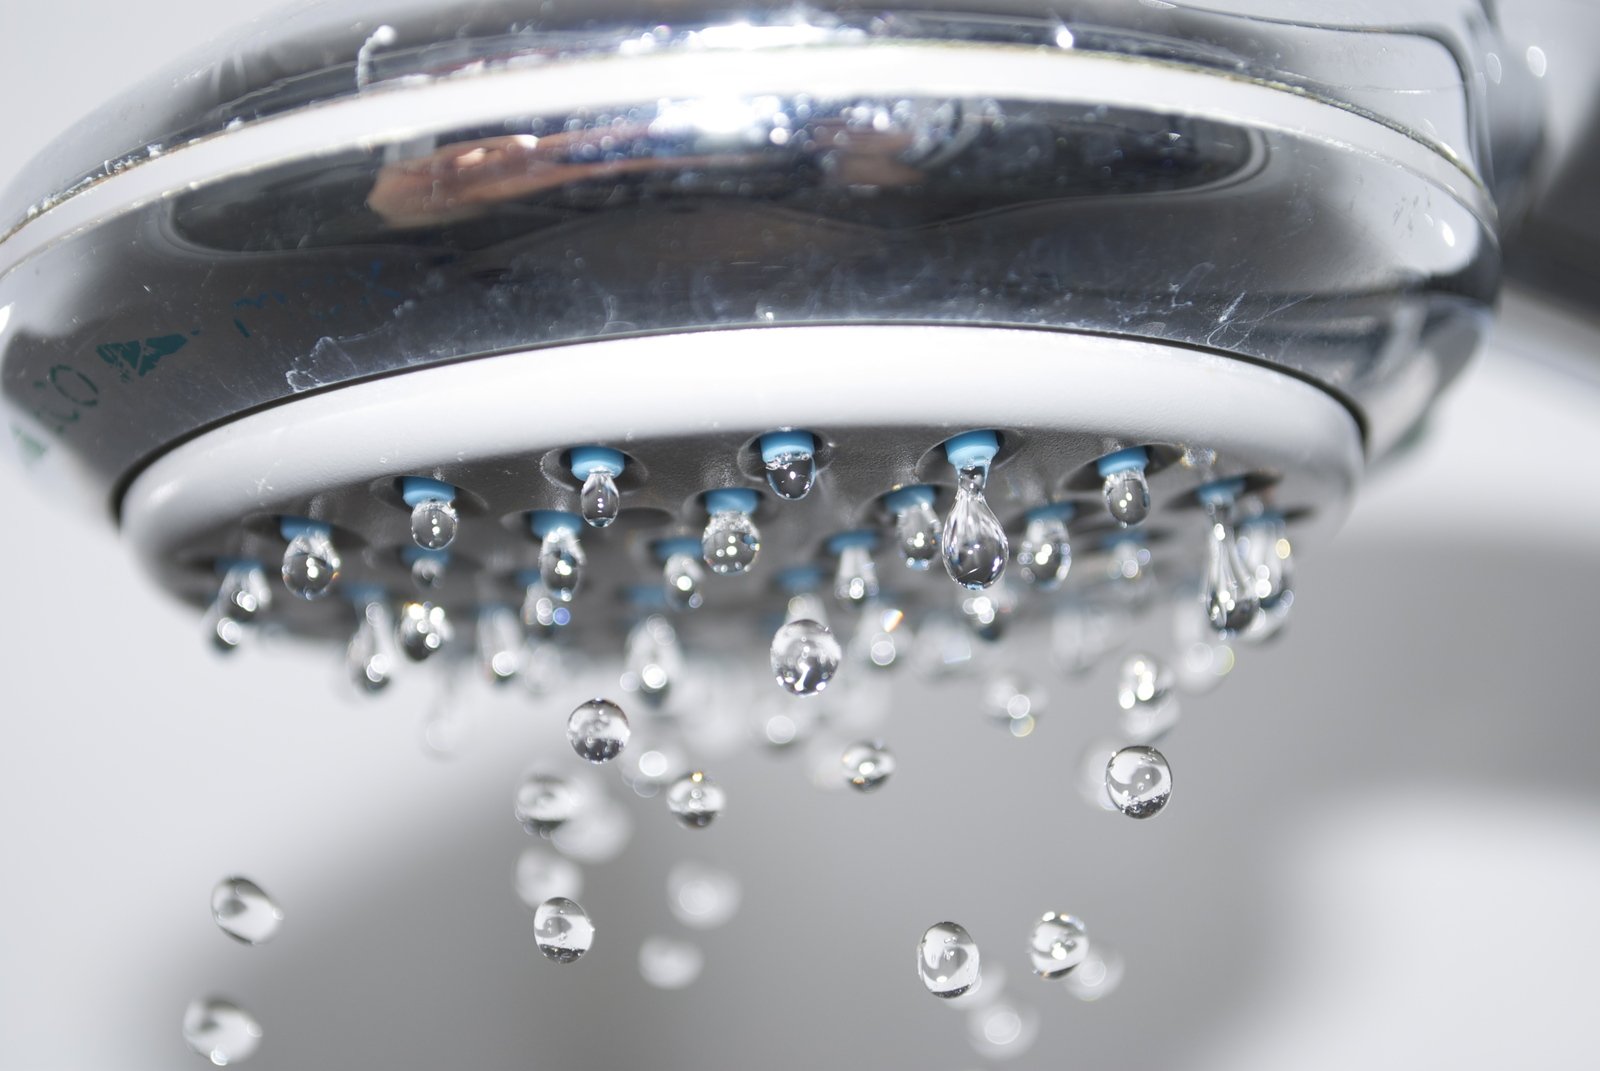 this is an image of some shower heads with water coming out